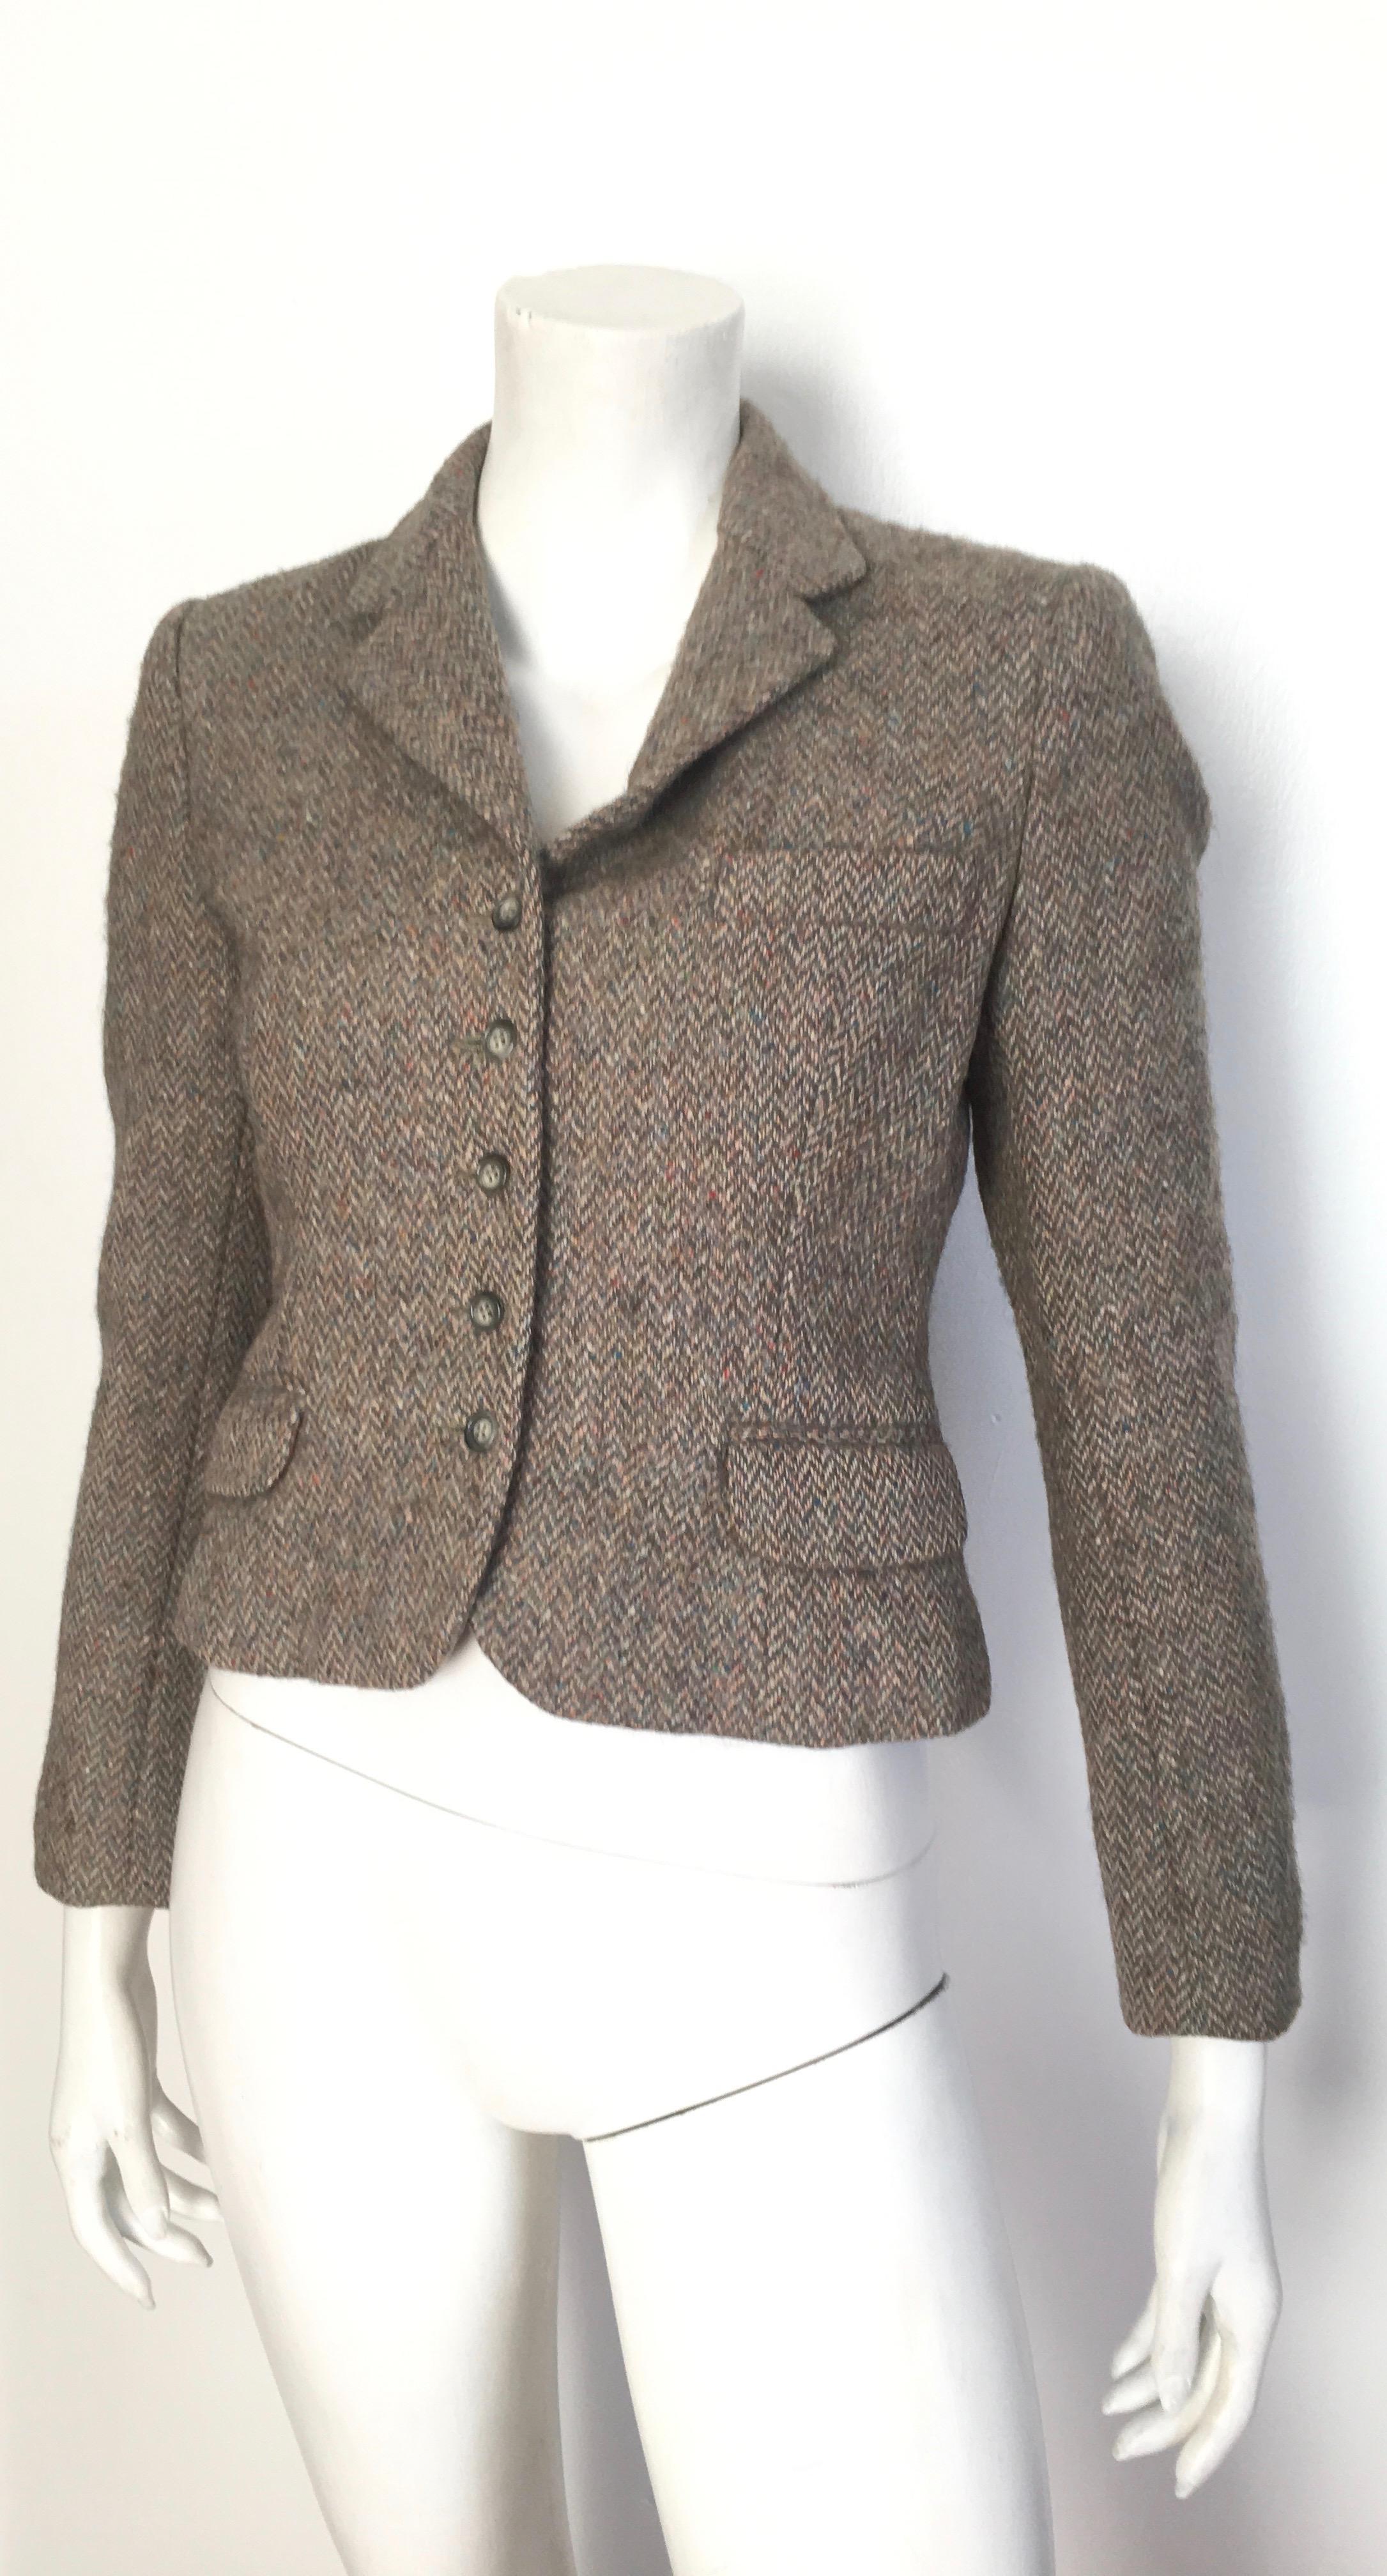 Gray Pierre Cardin for Bloomingdale's 1960s Wool Cropped Jacket Size 4.